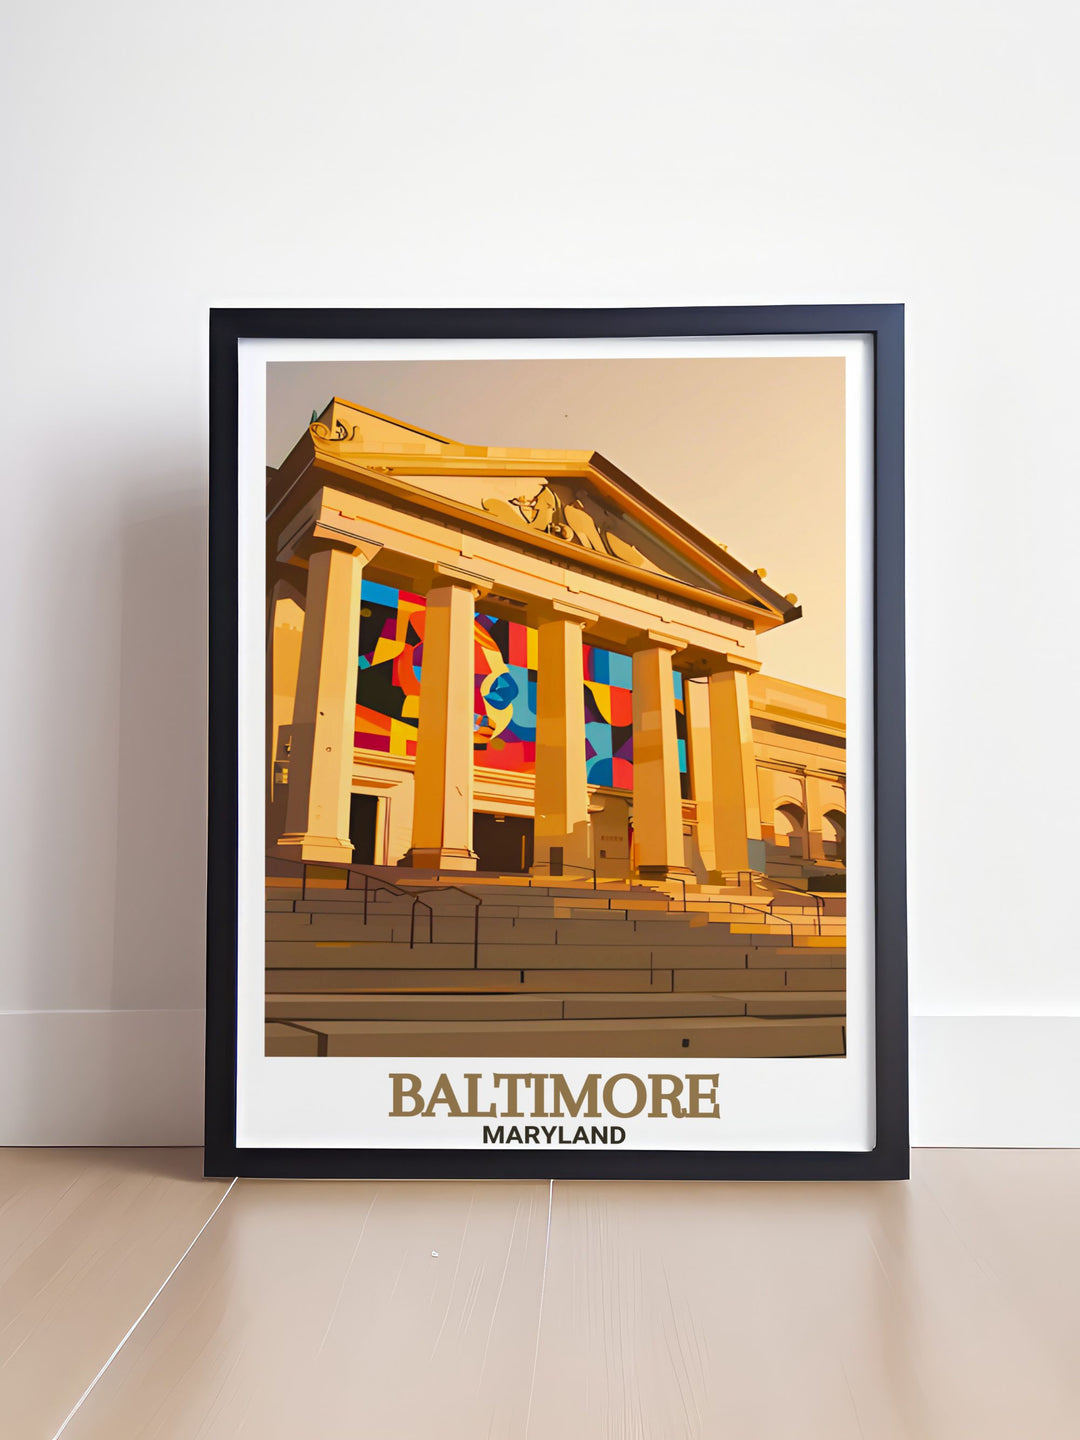 Captivating Baltimore Museum of Art poster featuring an intricately detailed map of Baltimore city an ideal wall art piece that brings urban elegance to your home decor and serves as a beautiful reminder of the citys vibrant culture